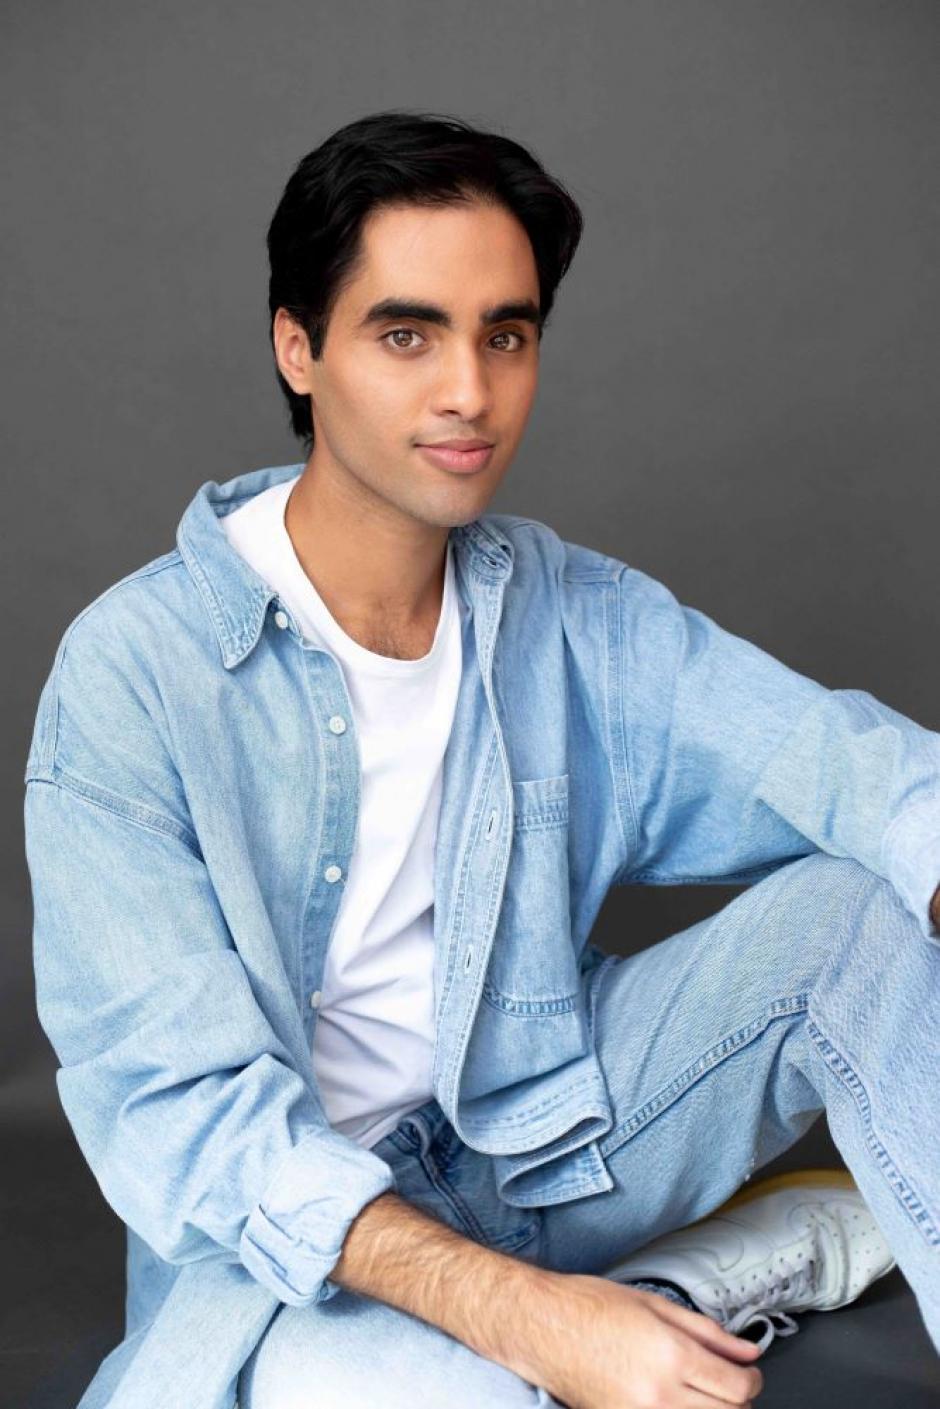 Davinder Malhi is wearing a light blue denim shirt unbuttoned over a white tshirt and is smiling into the camera